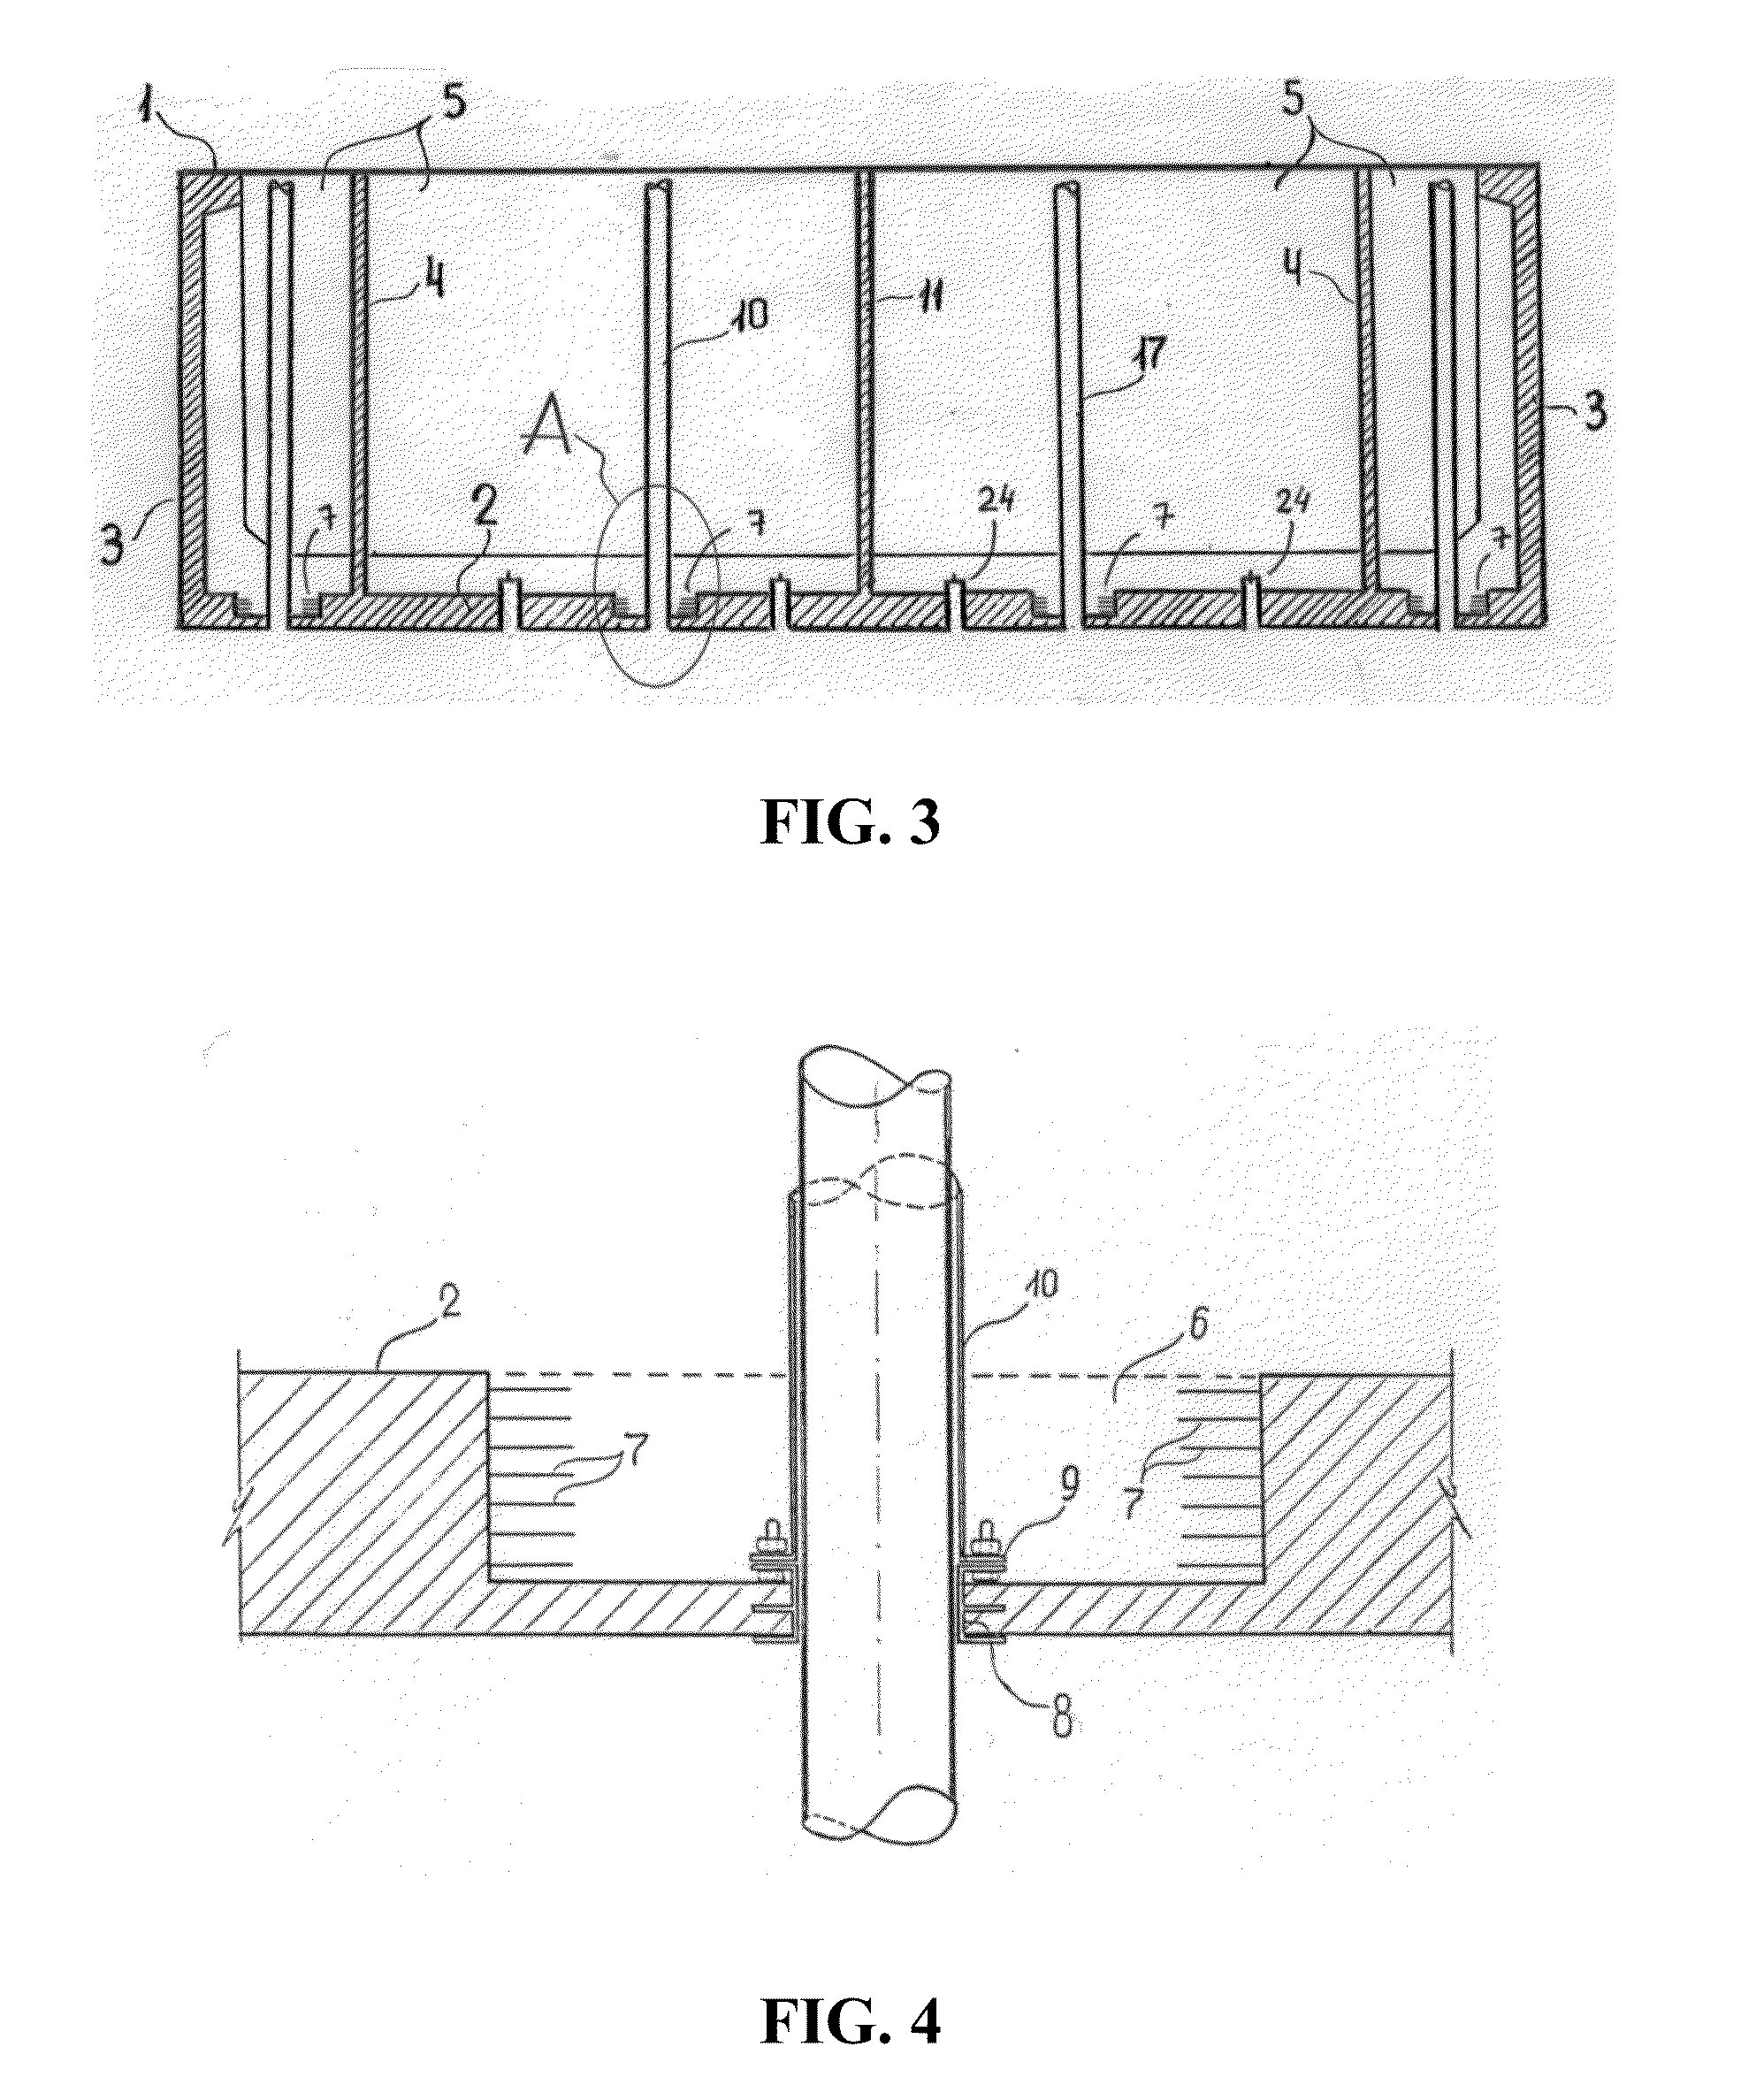 Method of erecting a building structure in a water basin